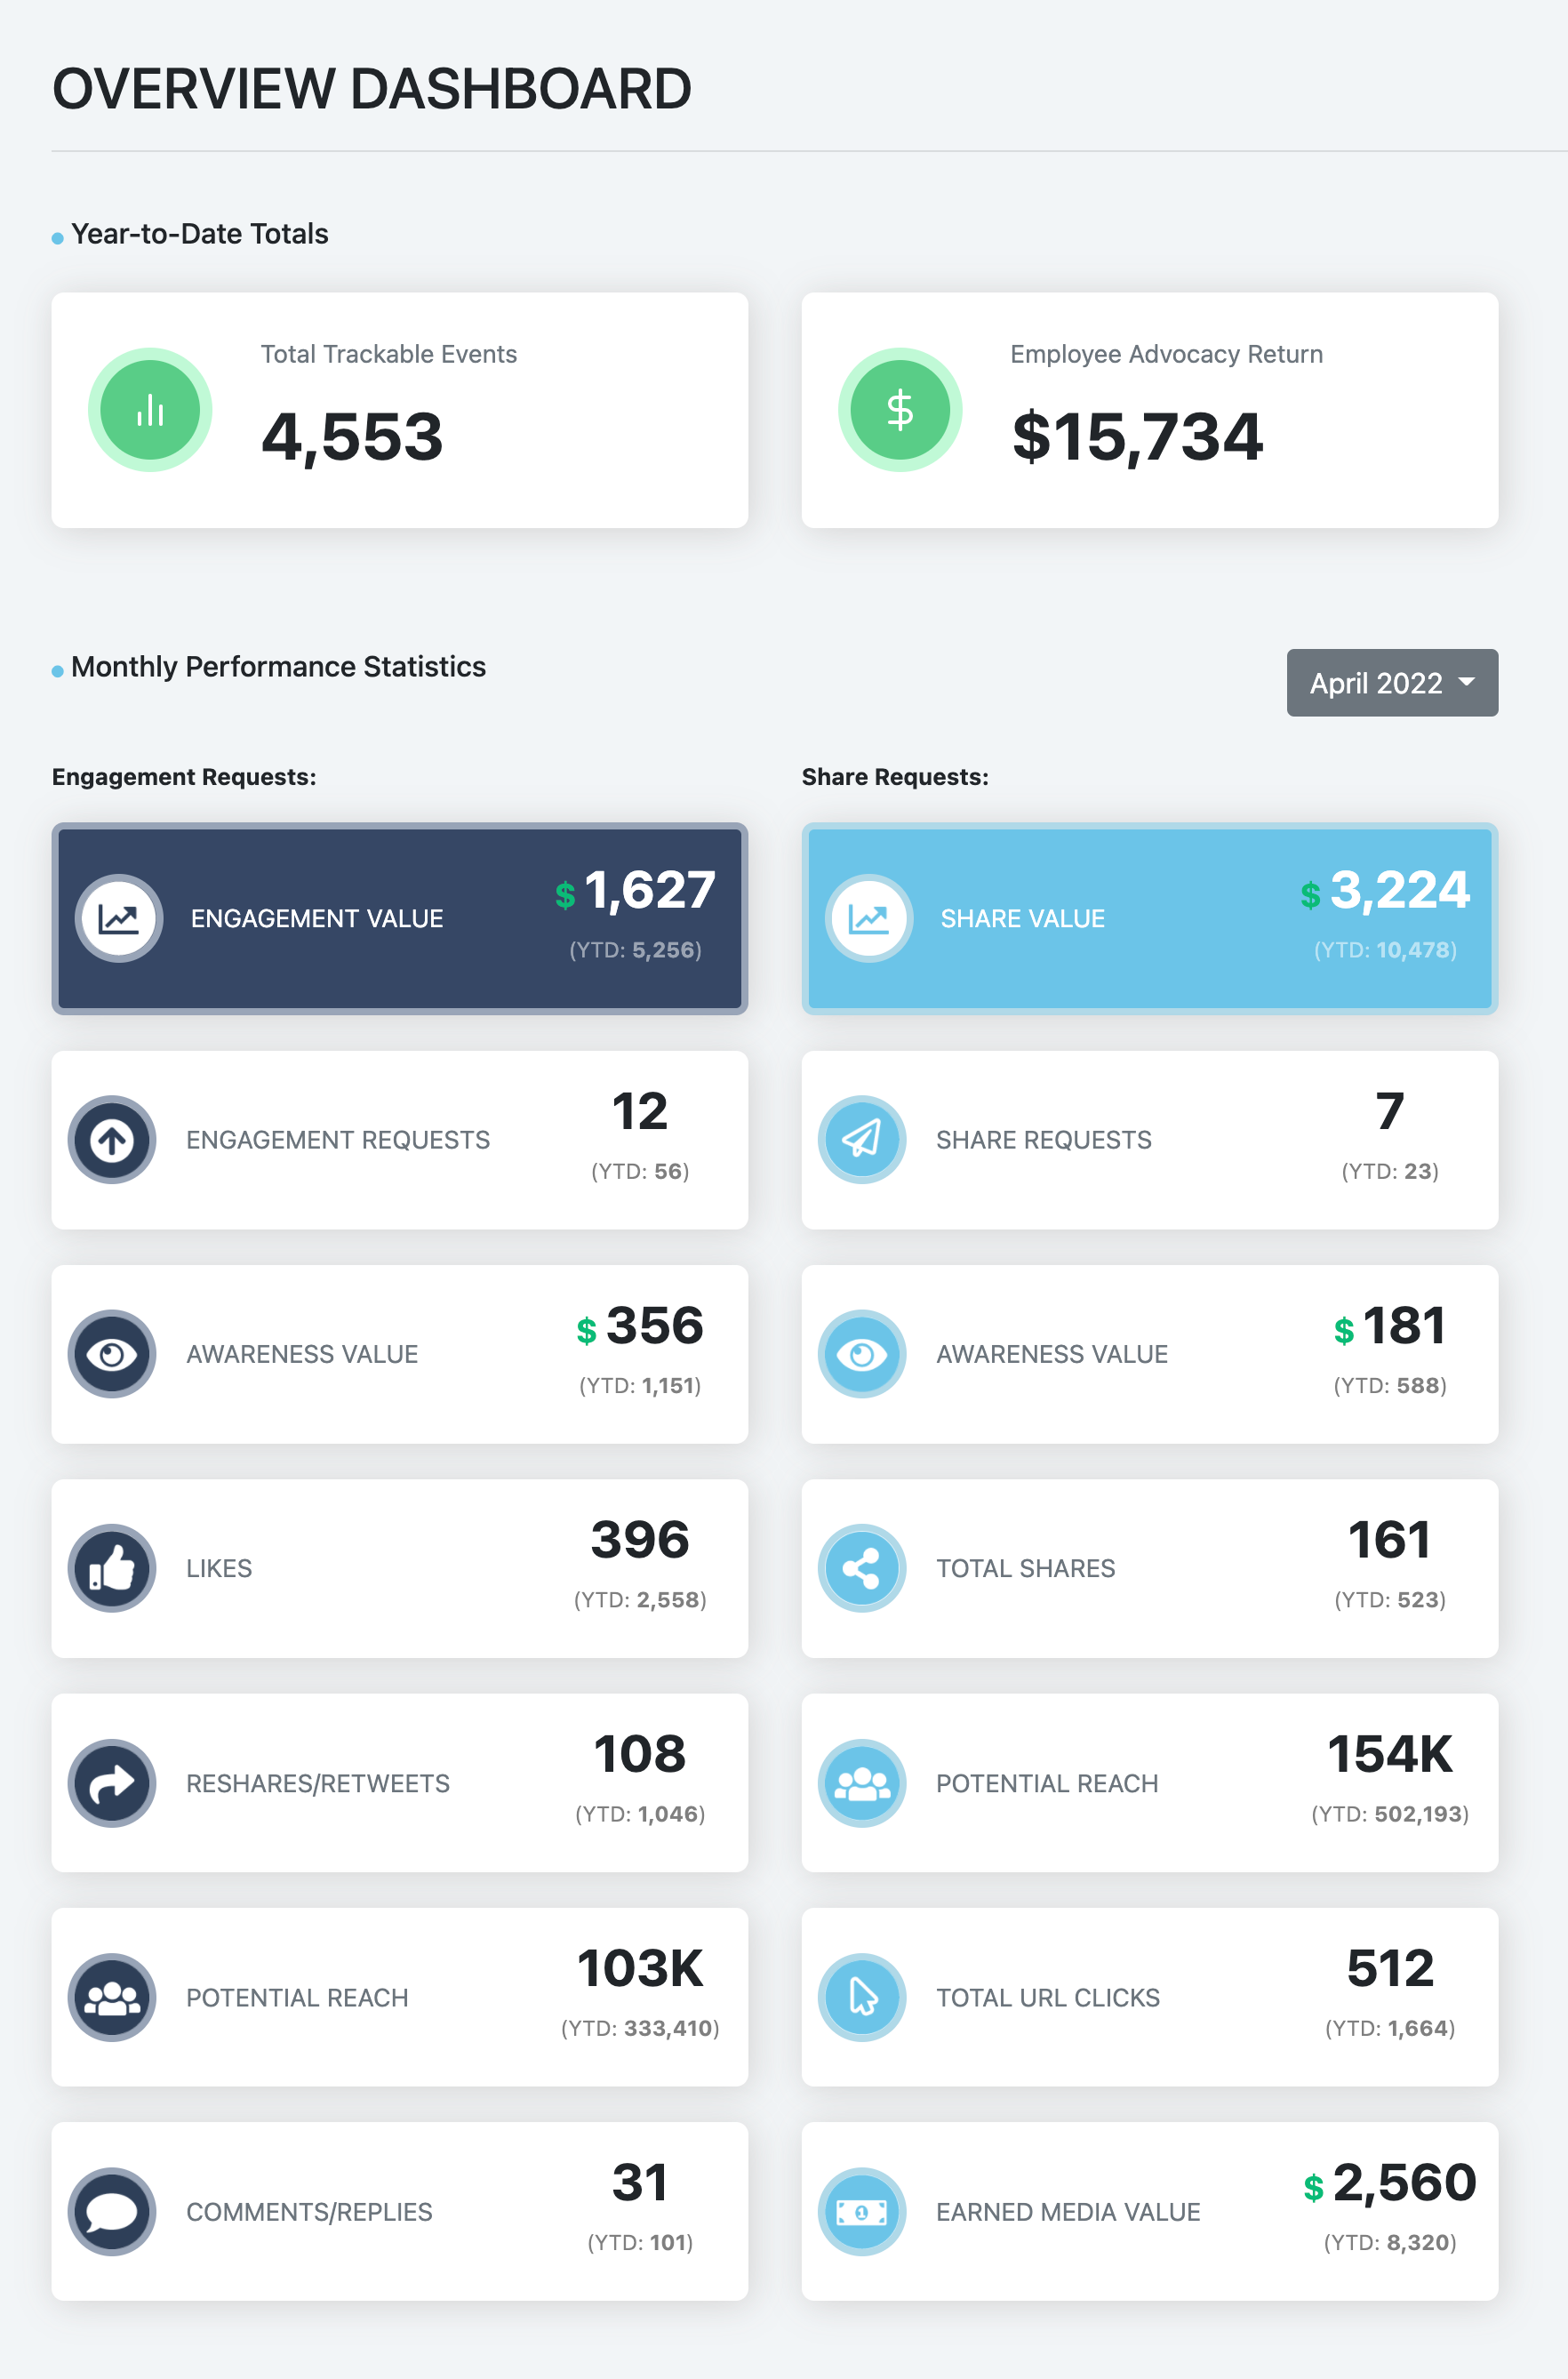 Please Share Overview Dashboard